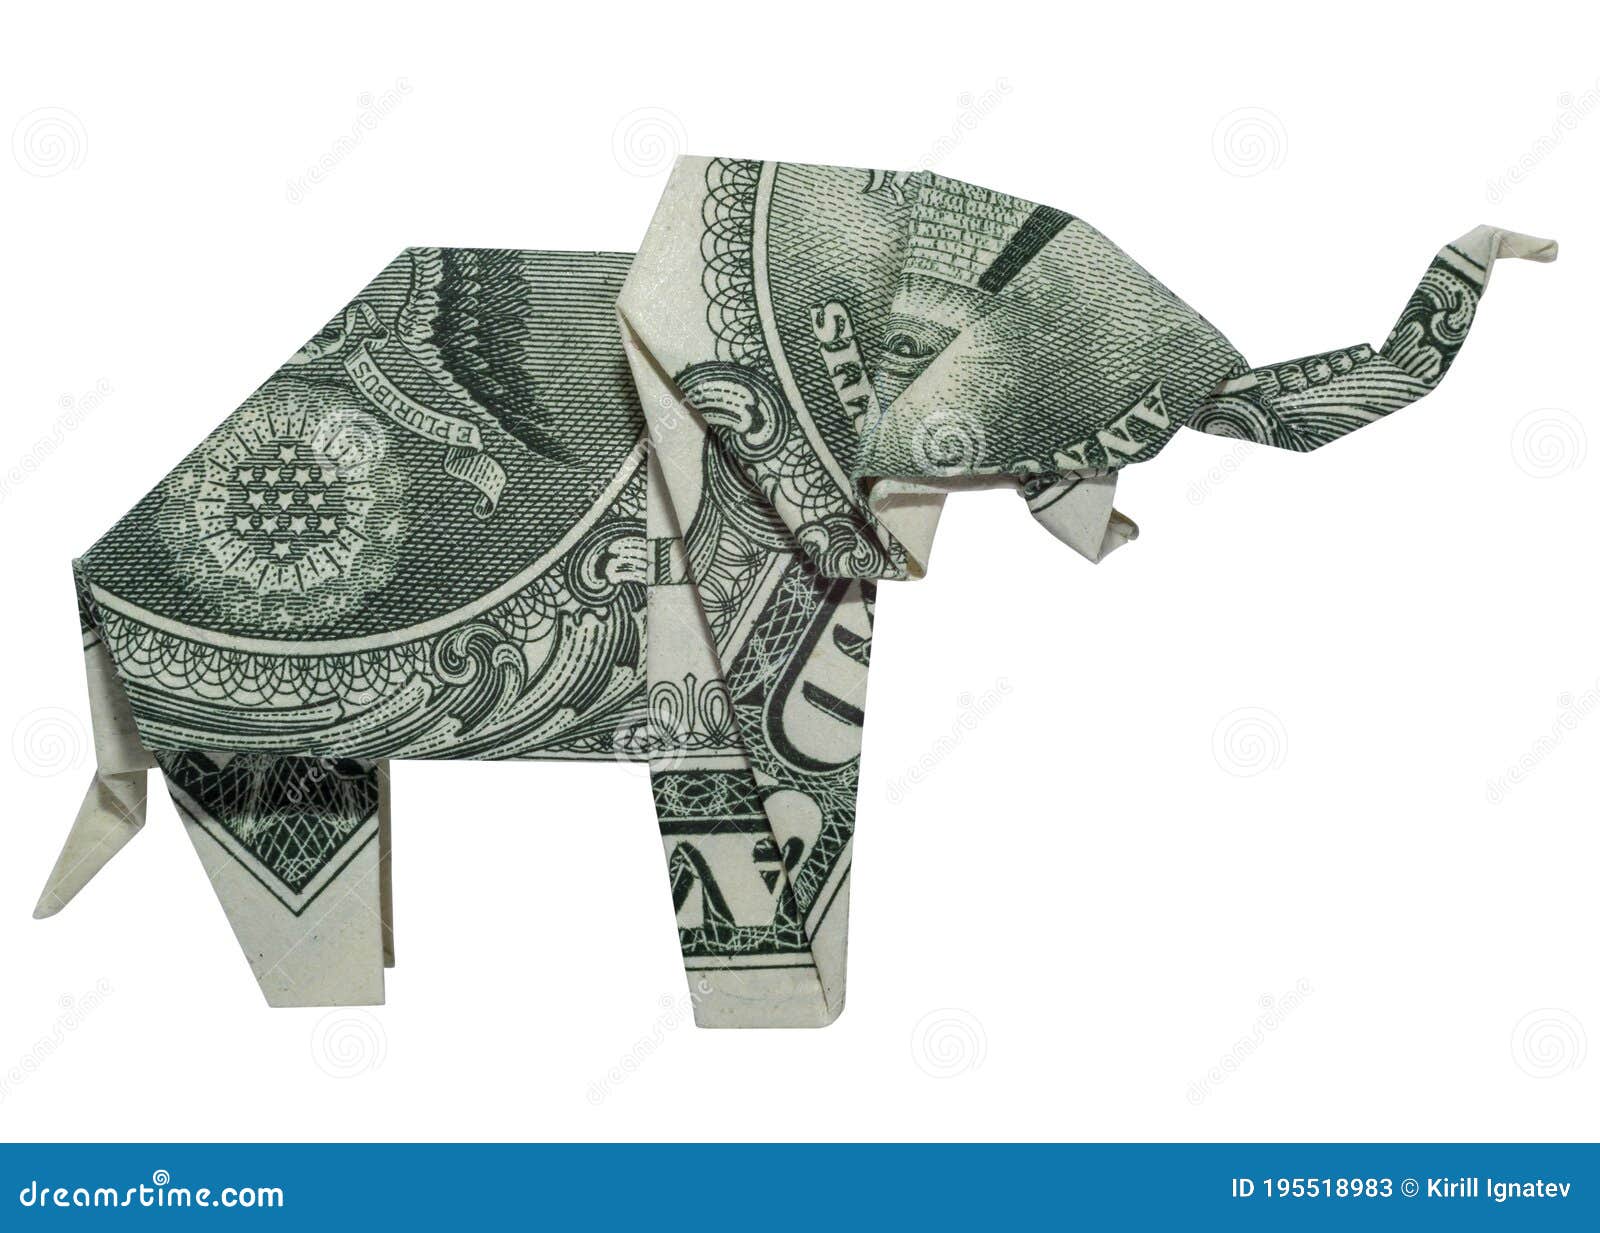 money-origami-elephant-right-side-folded-with-real-one-dollar-bill